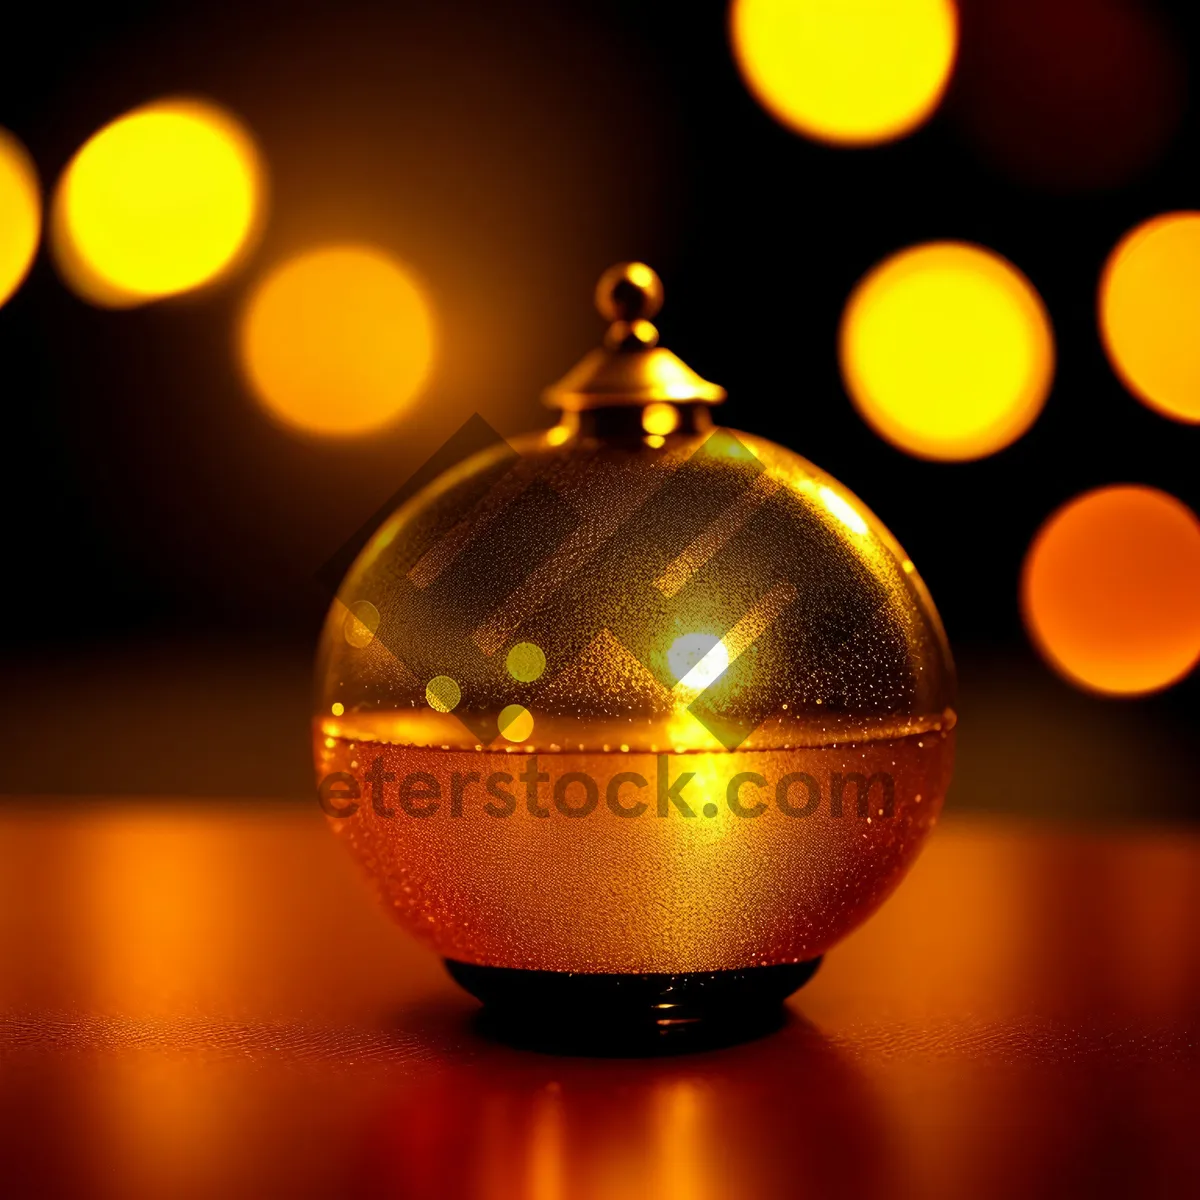 Picture of Golden Starry Winter Greeting Card Decoration